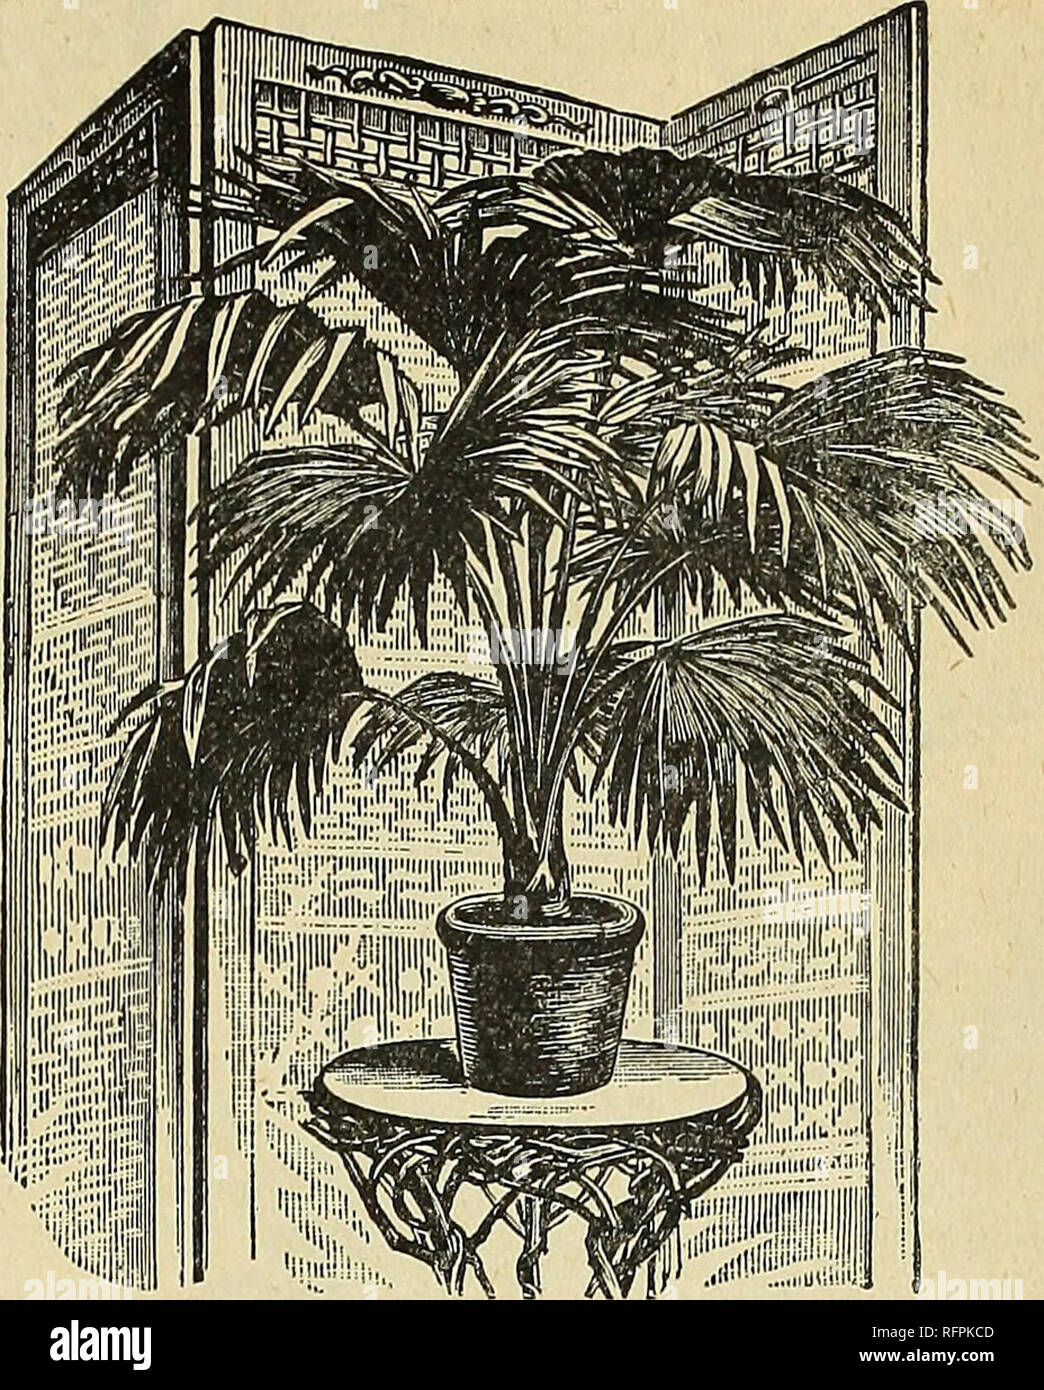 . The Geo H. Mellen Co. Innisfallen Greenhouses. Nurseries (Horticulture) Ohio Urbana Catalogs; Plants, Ornamental Catalogs; Flowers Seeds Catalogs; Roses Catalogs; Fruit Catalogs; Nurseries (Horticulture); Plants, Ornamental; Flowers; Roses; Fruit. Pandanus Utilis. Pandanus Utilis—For majesty of form and gracefully ar- ranged foliage this is without a peer, while its vigorous con- stitution enables it to stand more neglect, without serious in- jury, than almost any other plant we know of. As an orna- ment for the window its glossy, dark green, serrated foliage renders it unusually attractive, Stock Photo